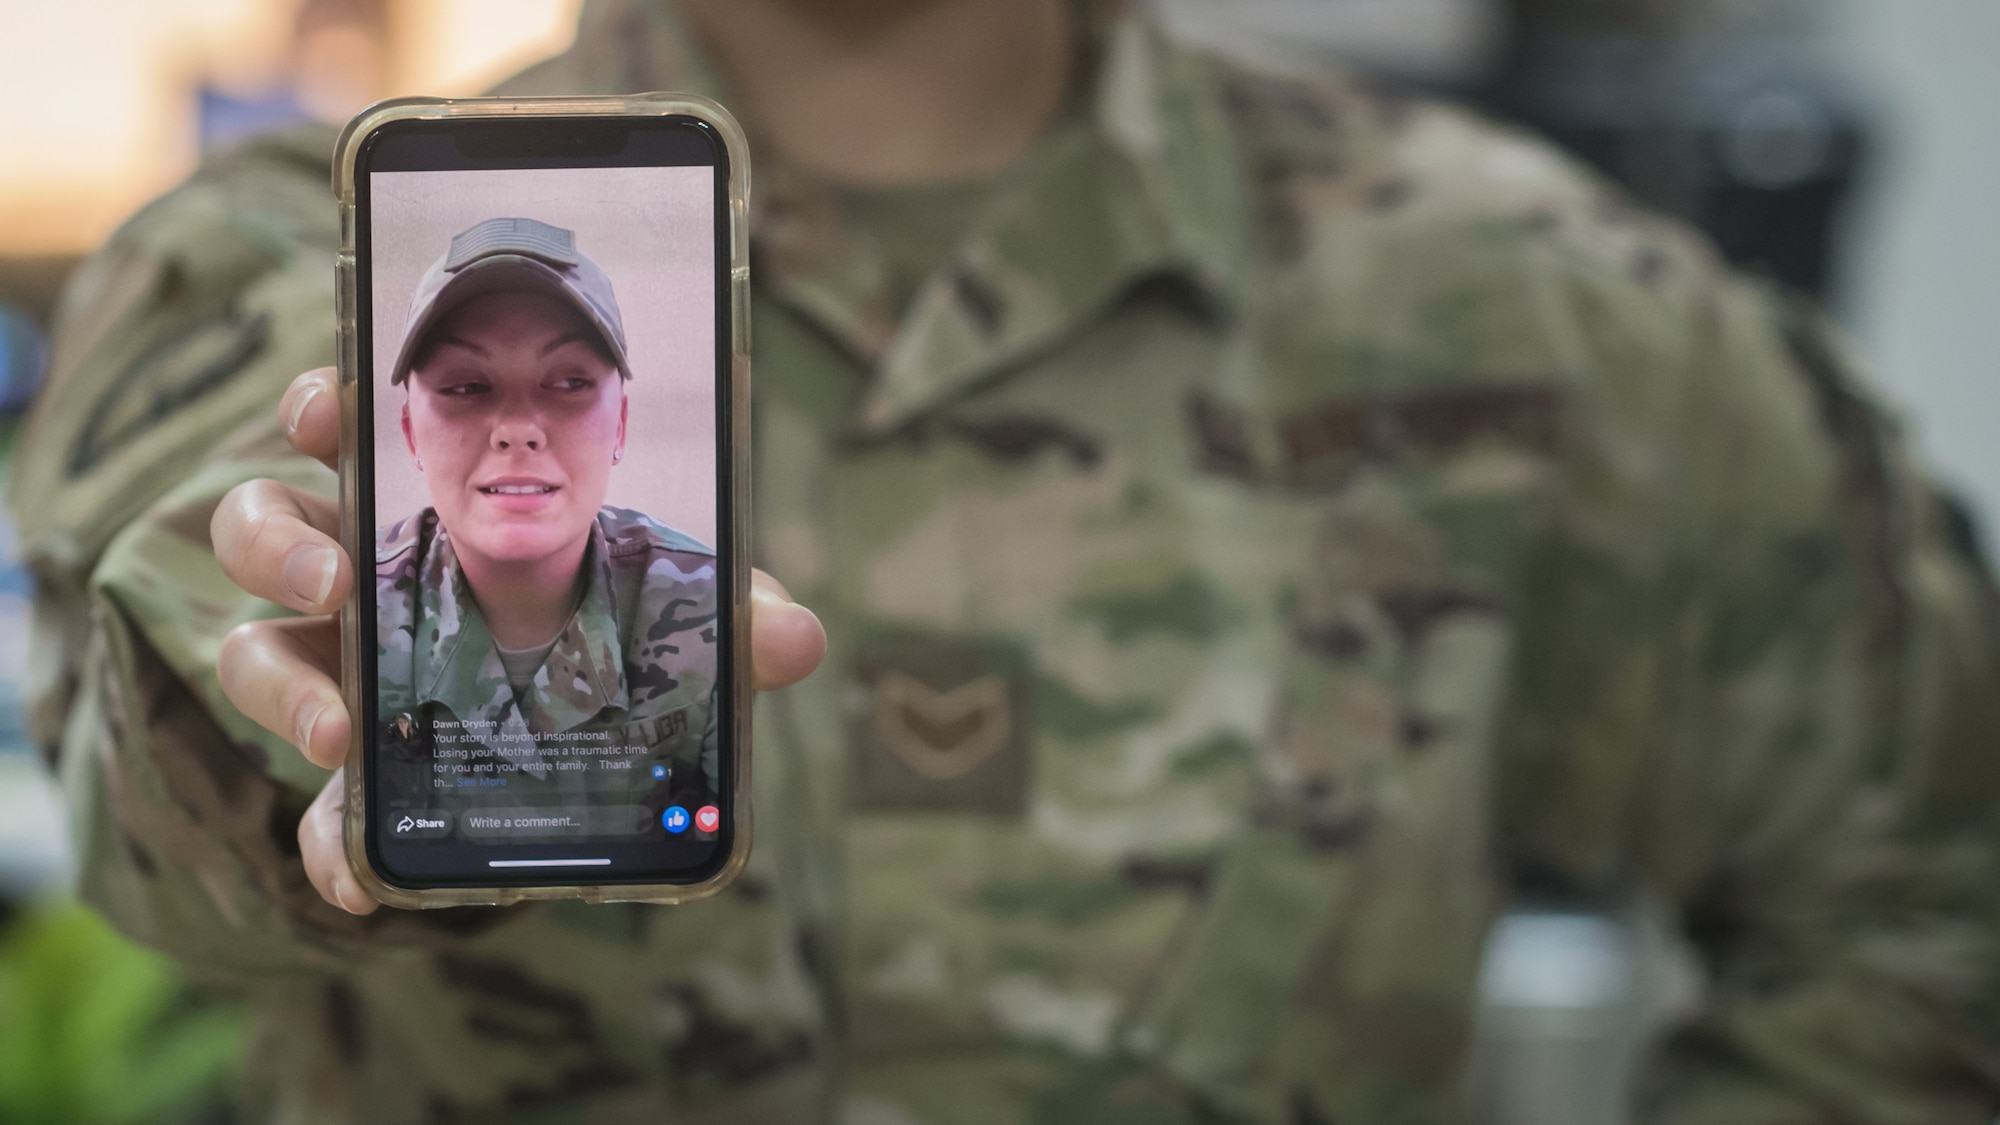 U.S. Air Force Staff Sgt. Alyssa Reilly, assigned to the 386th Expeditionary Security Forces Squadron, holds her phone as her video plays. Her video soon went viral after it was posted, eventually being shared by a Facebook group with more than 320,000 followers. (U.S. Air Force photo by Tech. Sgt. Daniel Martinez)